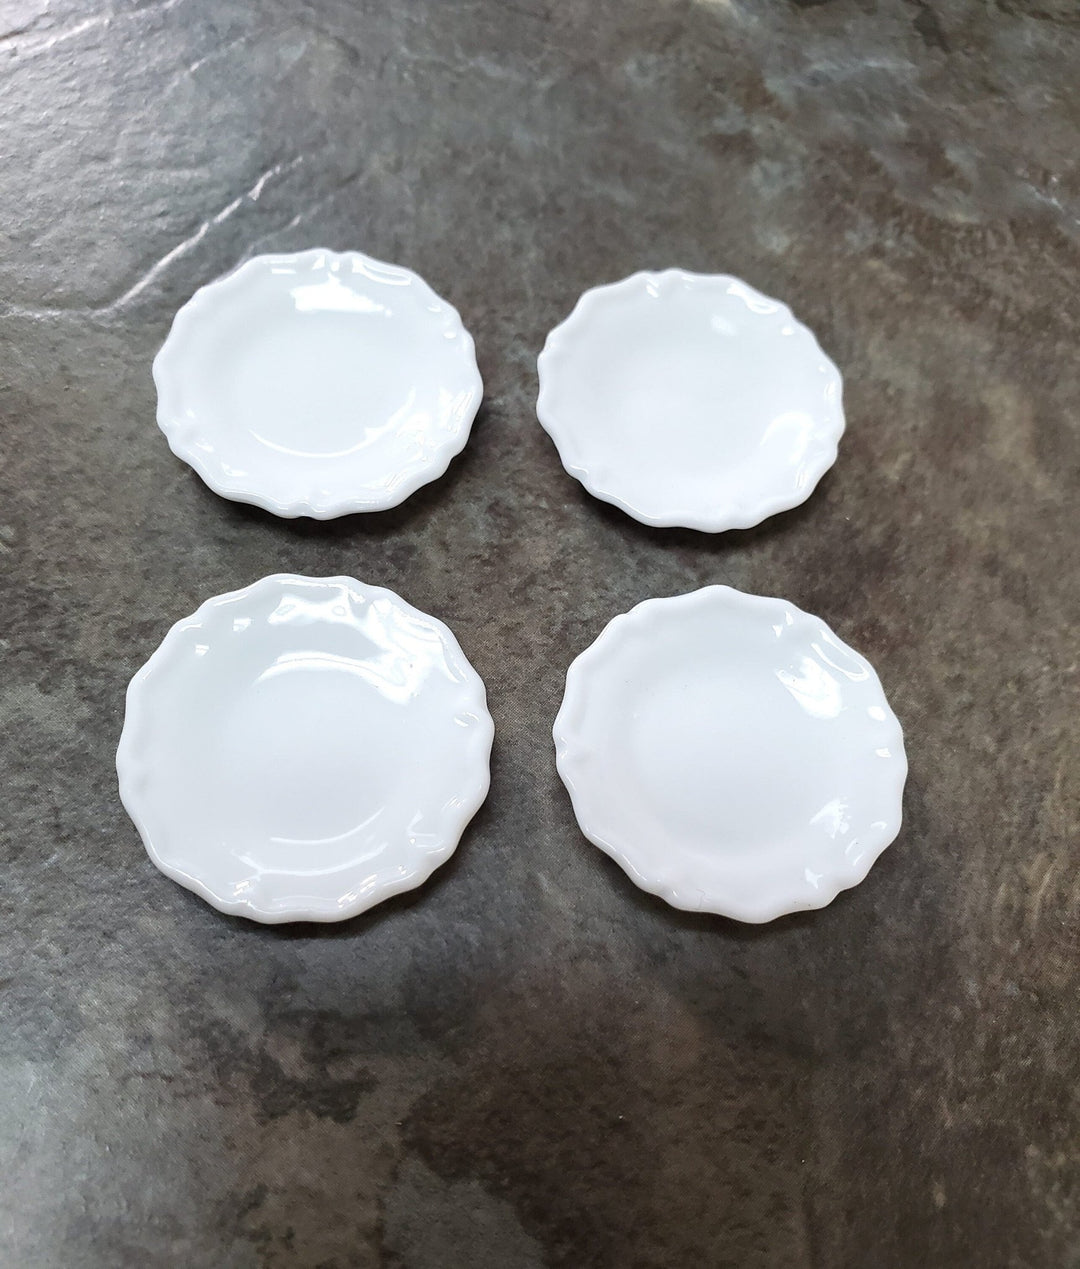 Dollhouse Glass Plates or Platters All White Scalloped Edge Ceramic Set of 4 Large Round 1 1/8" - Miniature Crush